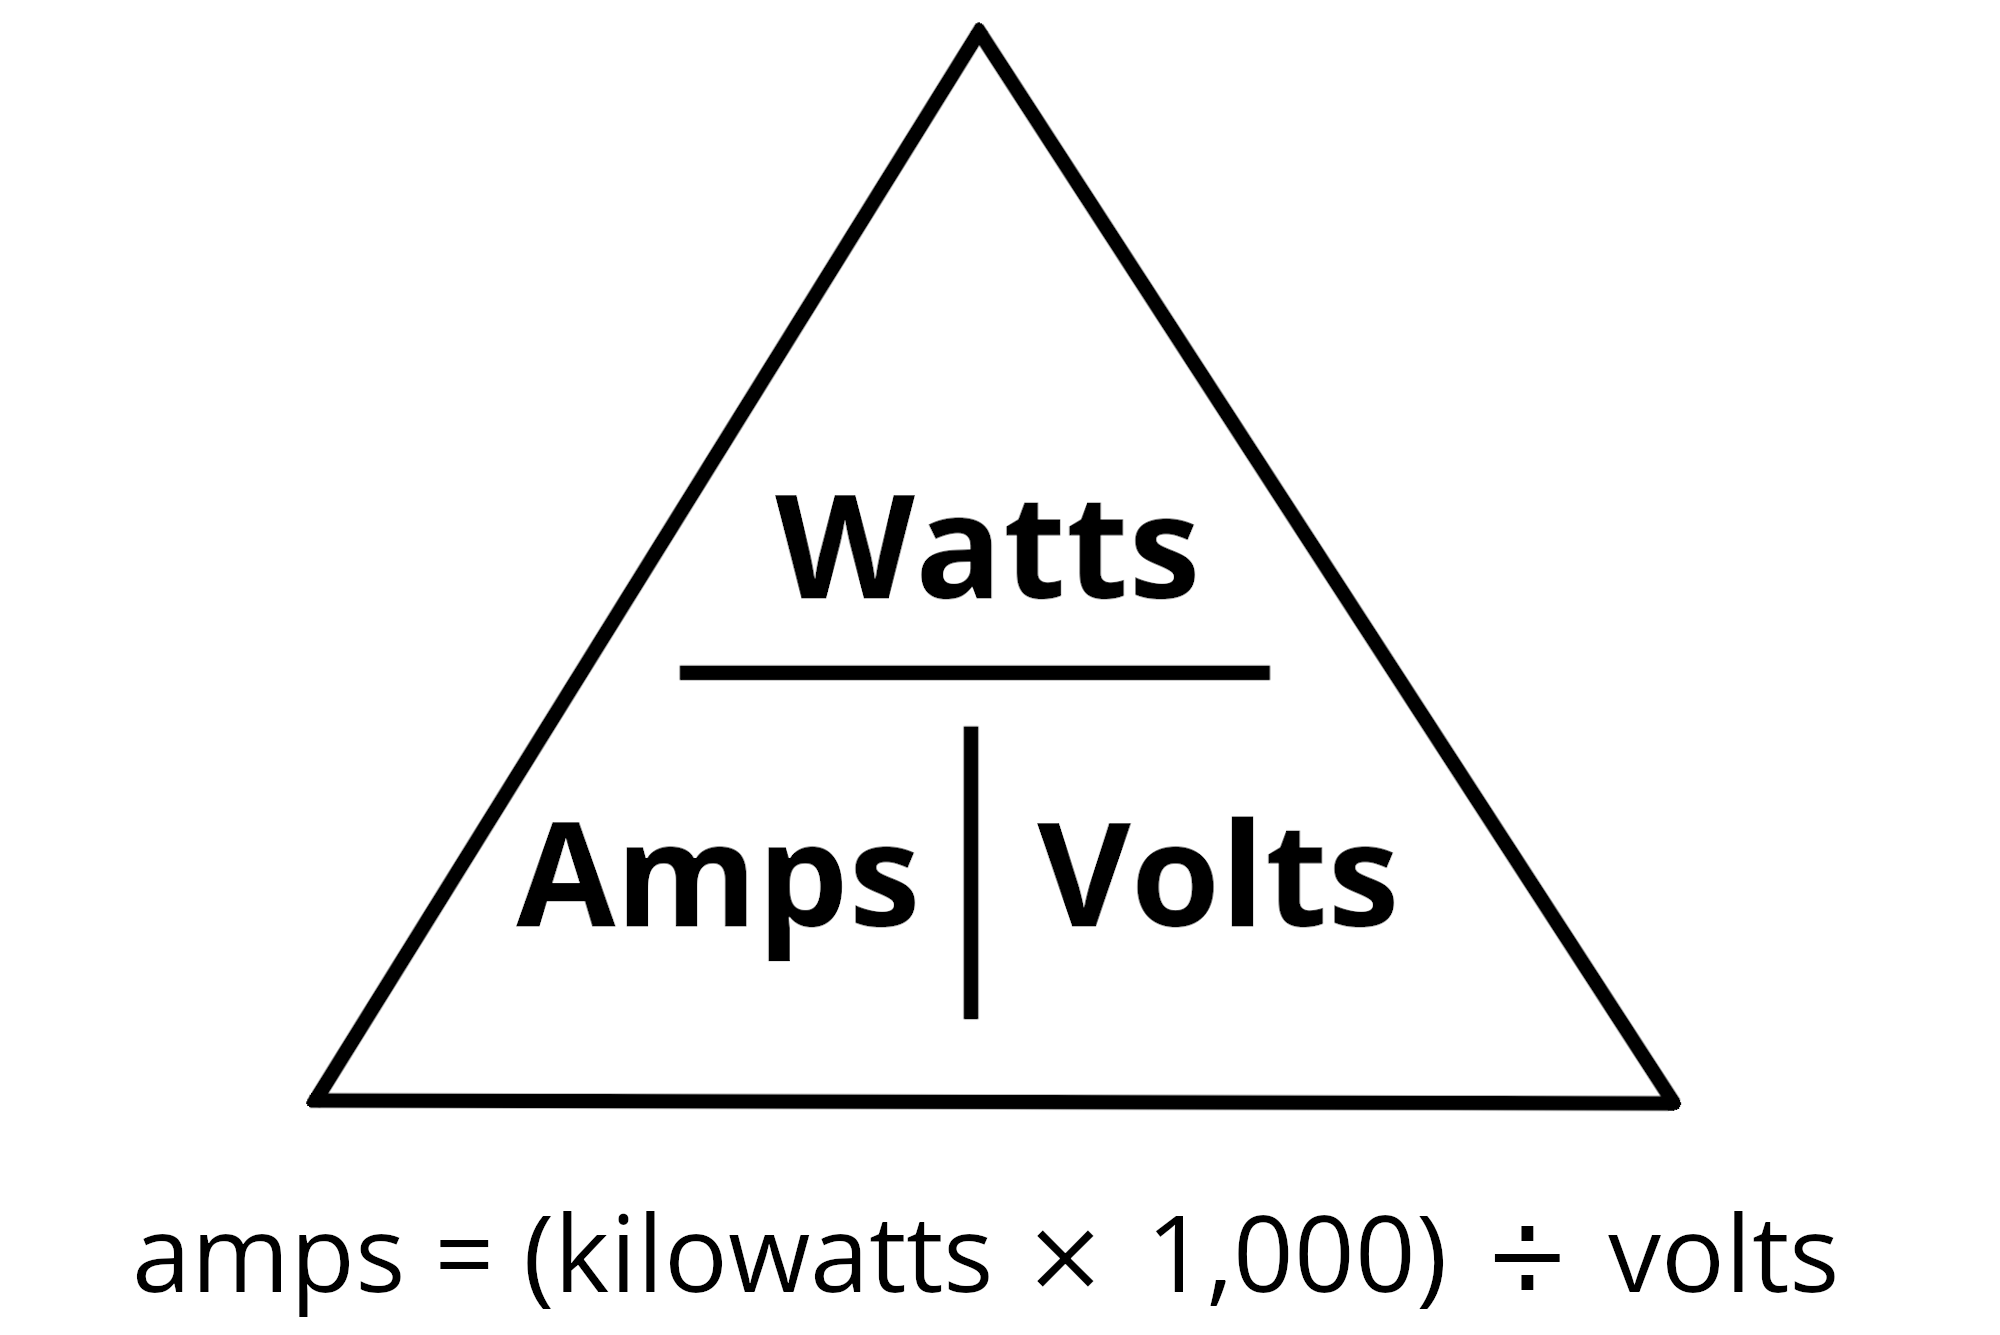 Power triangle illustrating the formula to convert kilowatts to amps with amps being equal to kilowatts times 1,000 divided by volts